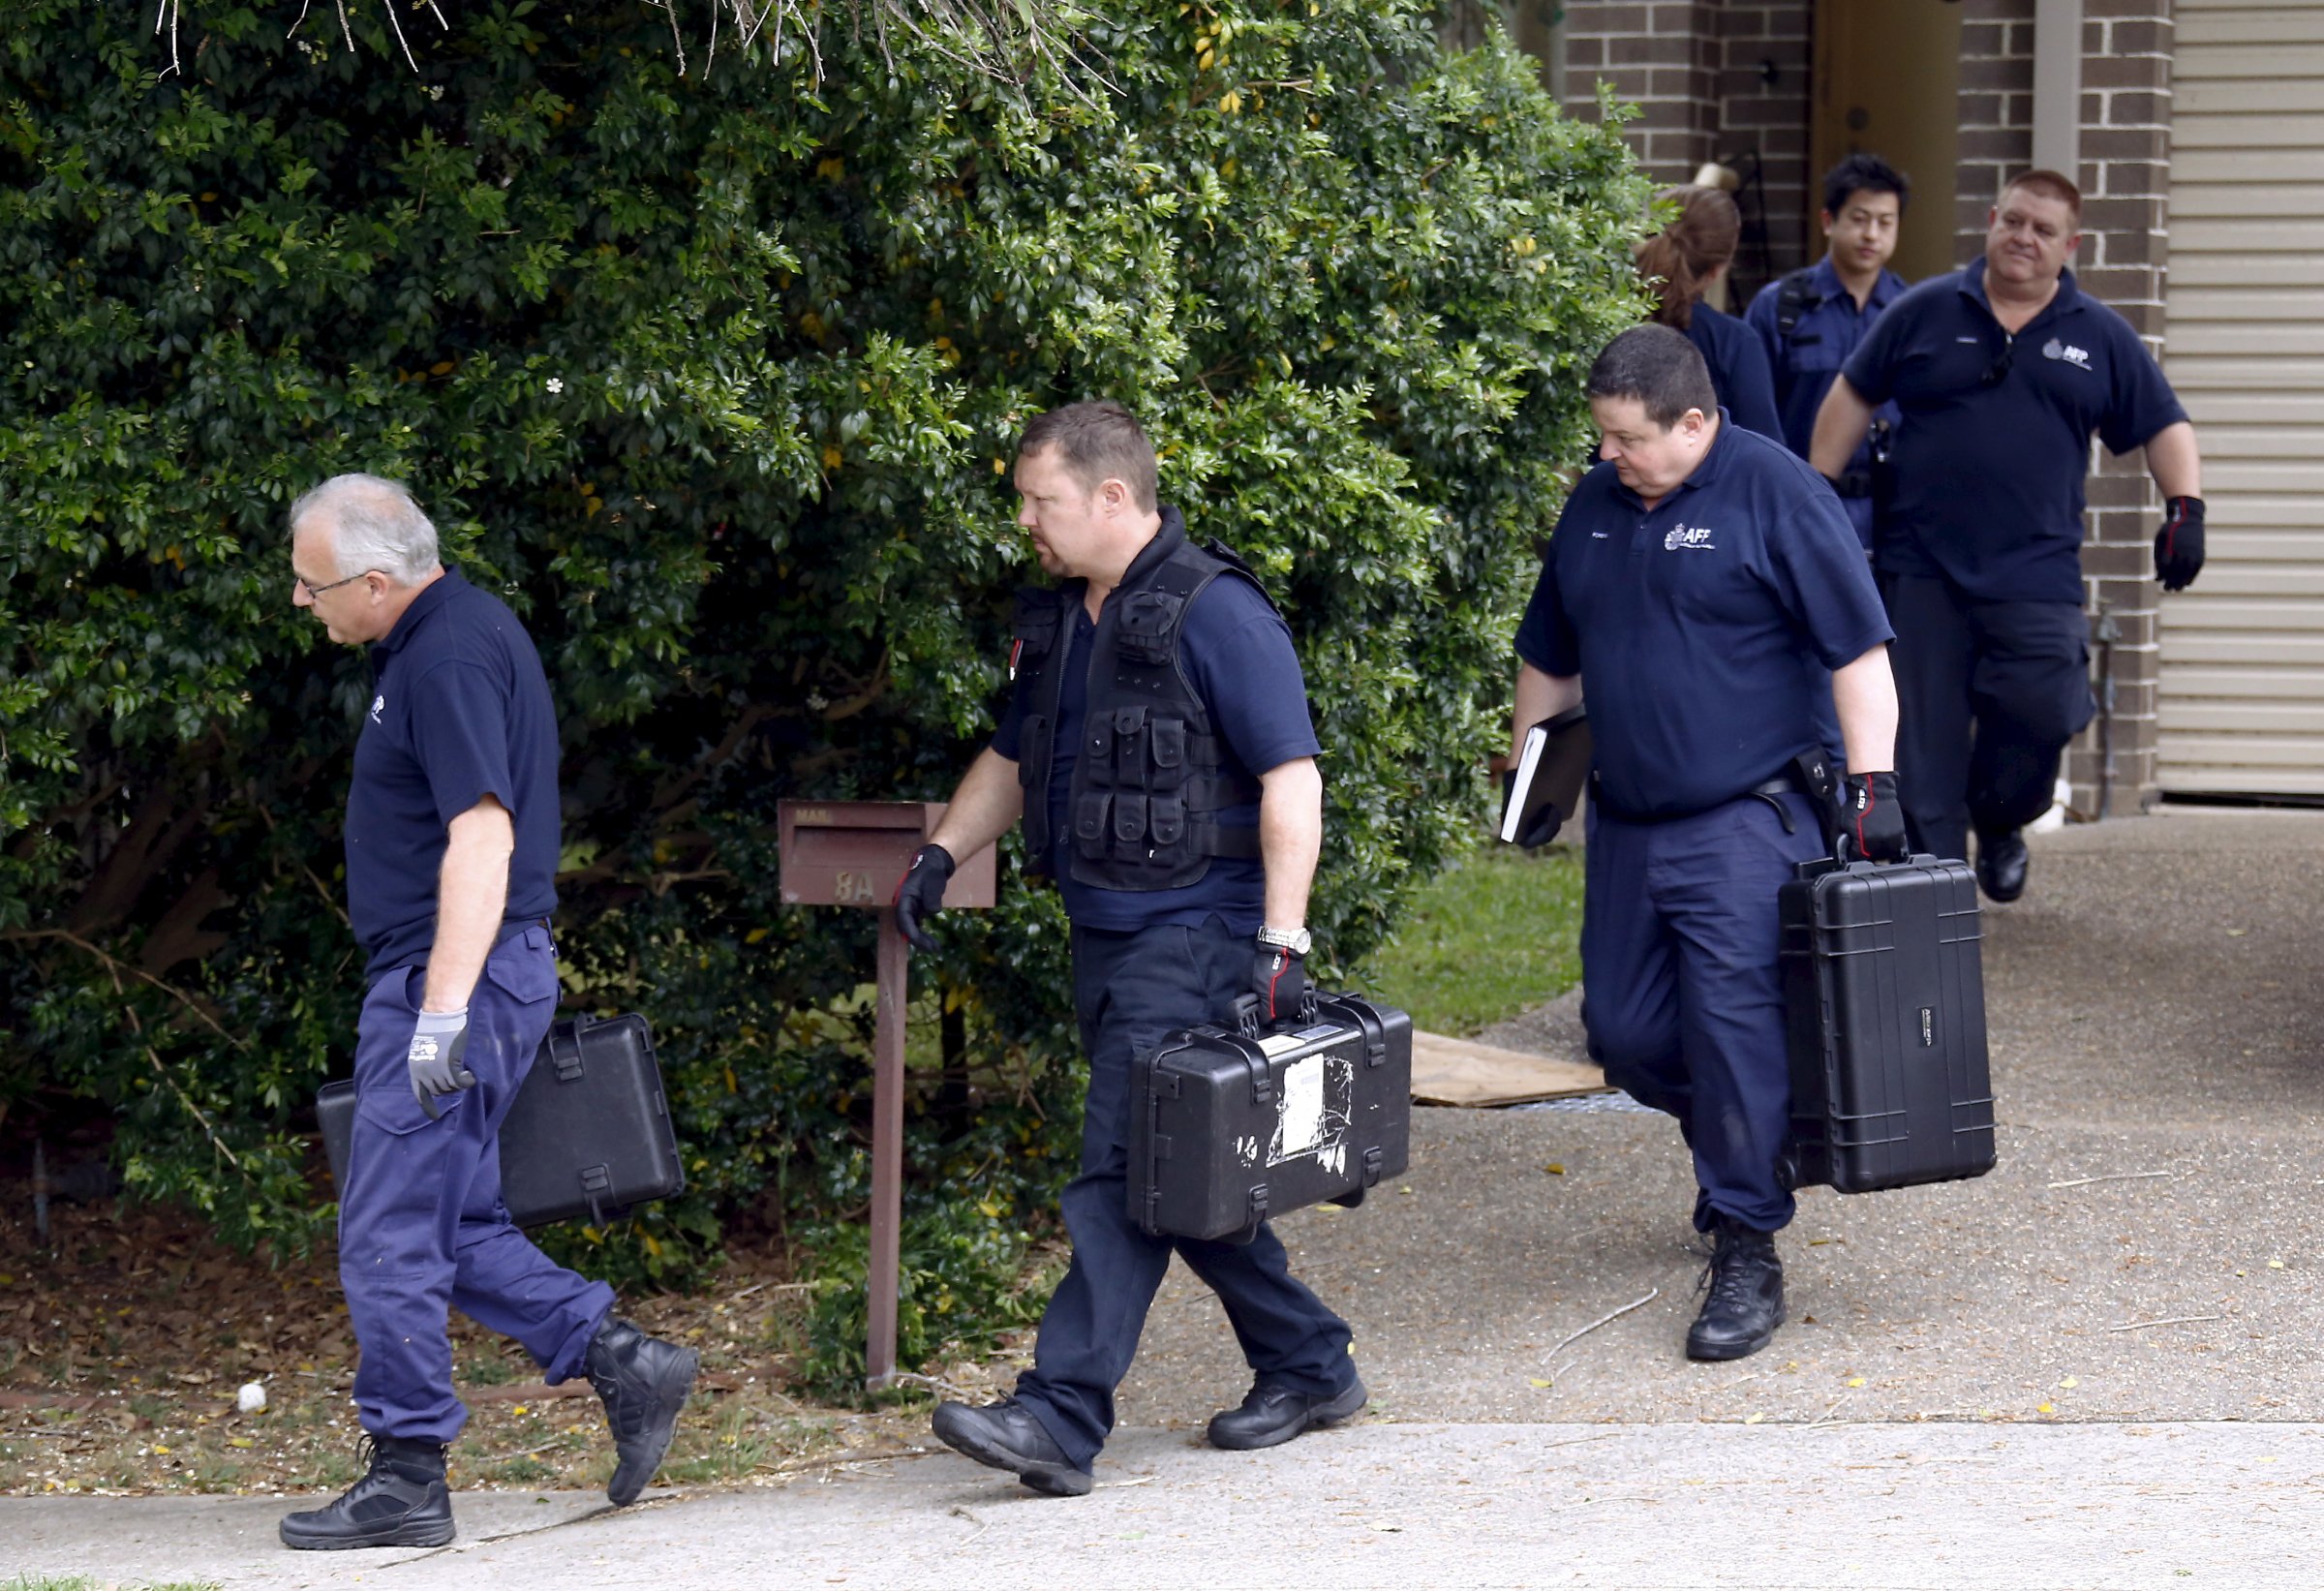 Australian Federal police officers carry equipment as they exit a house after arresting a man during early morning raids in western Sydney, Australia